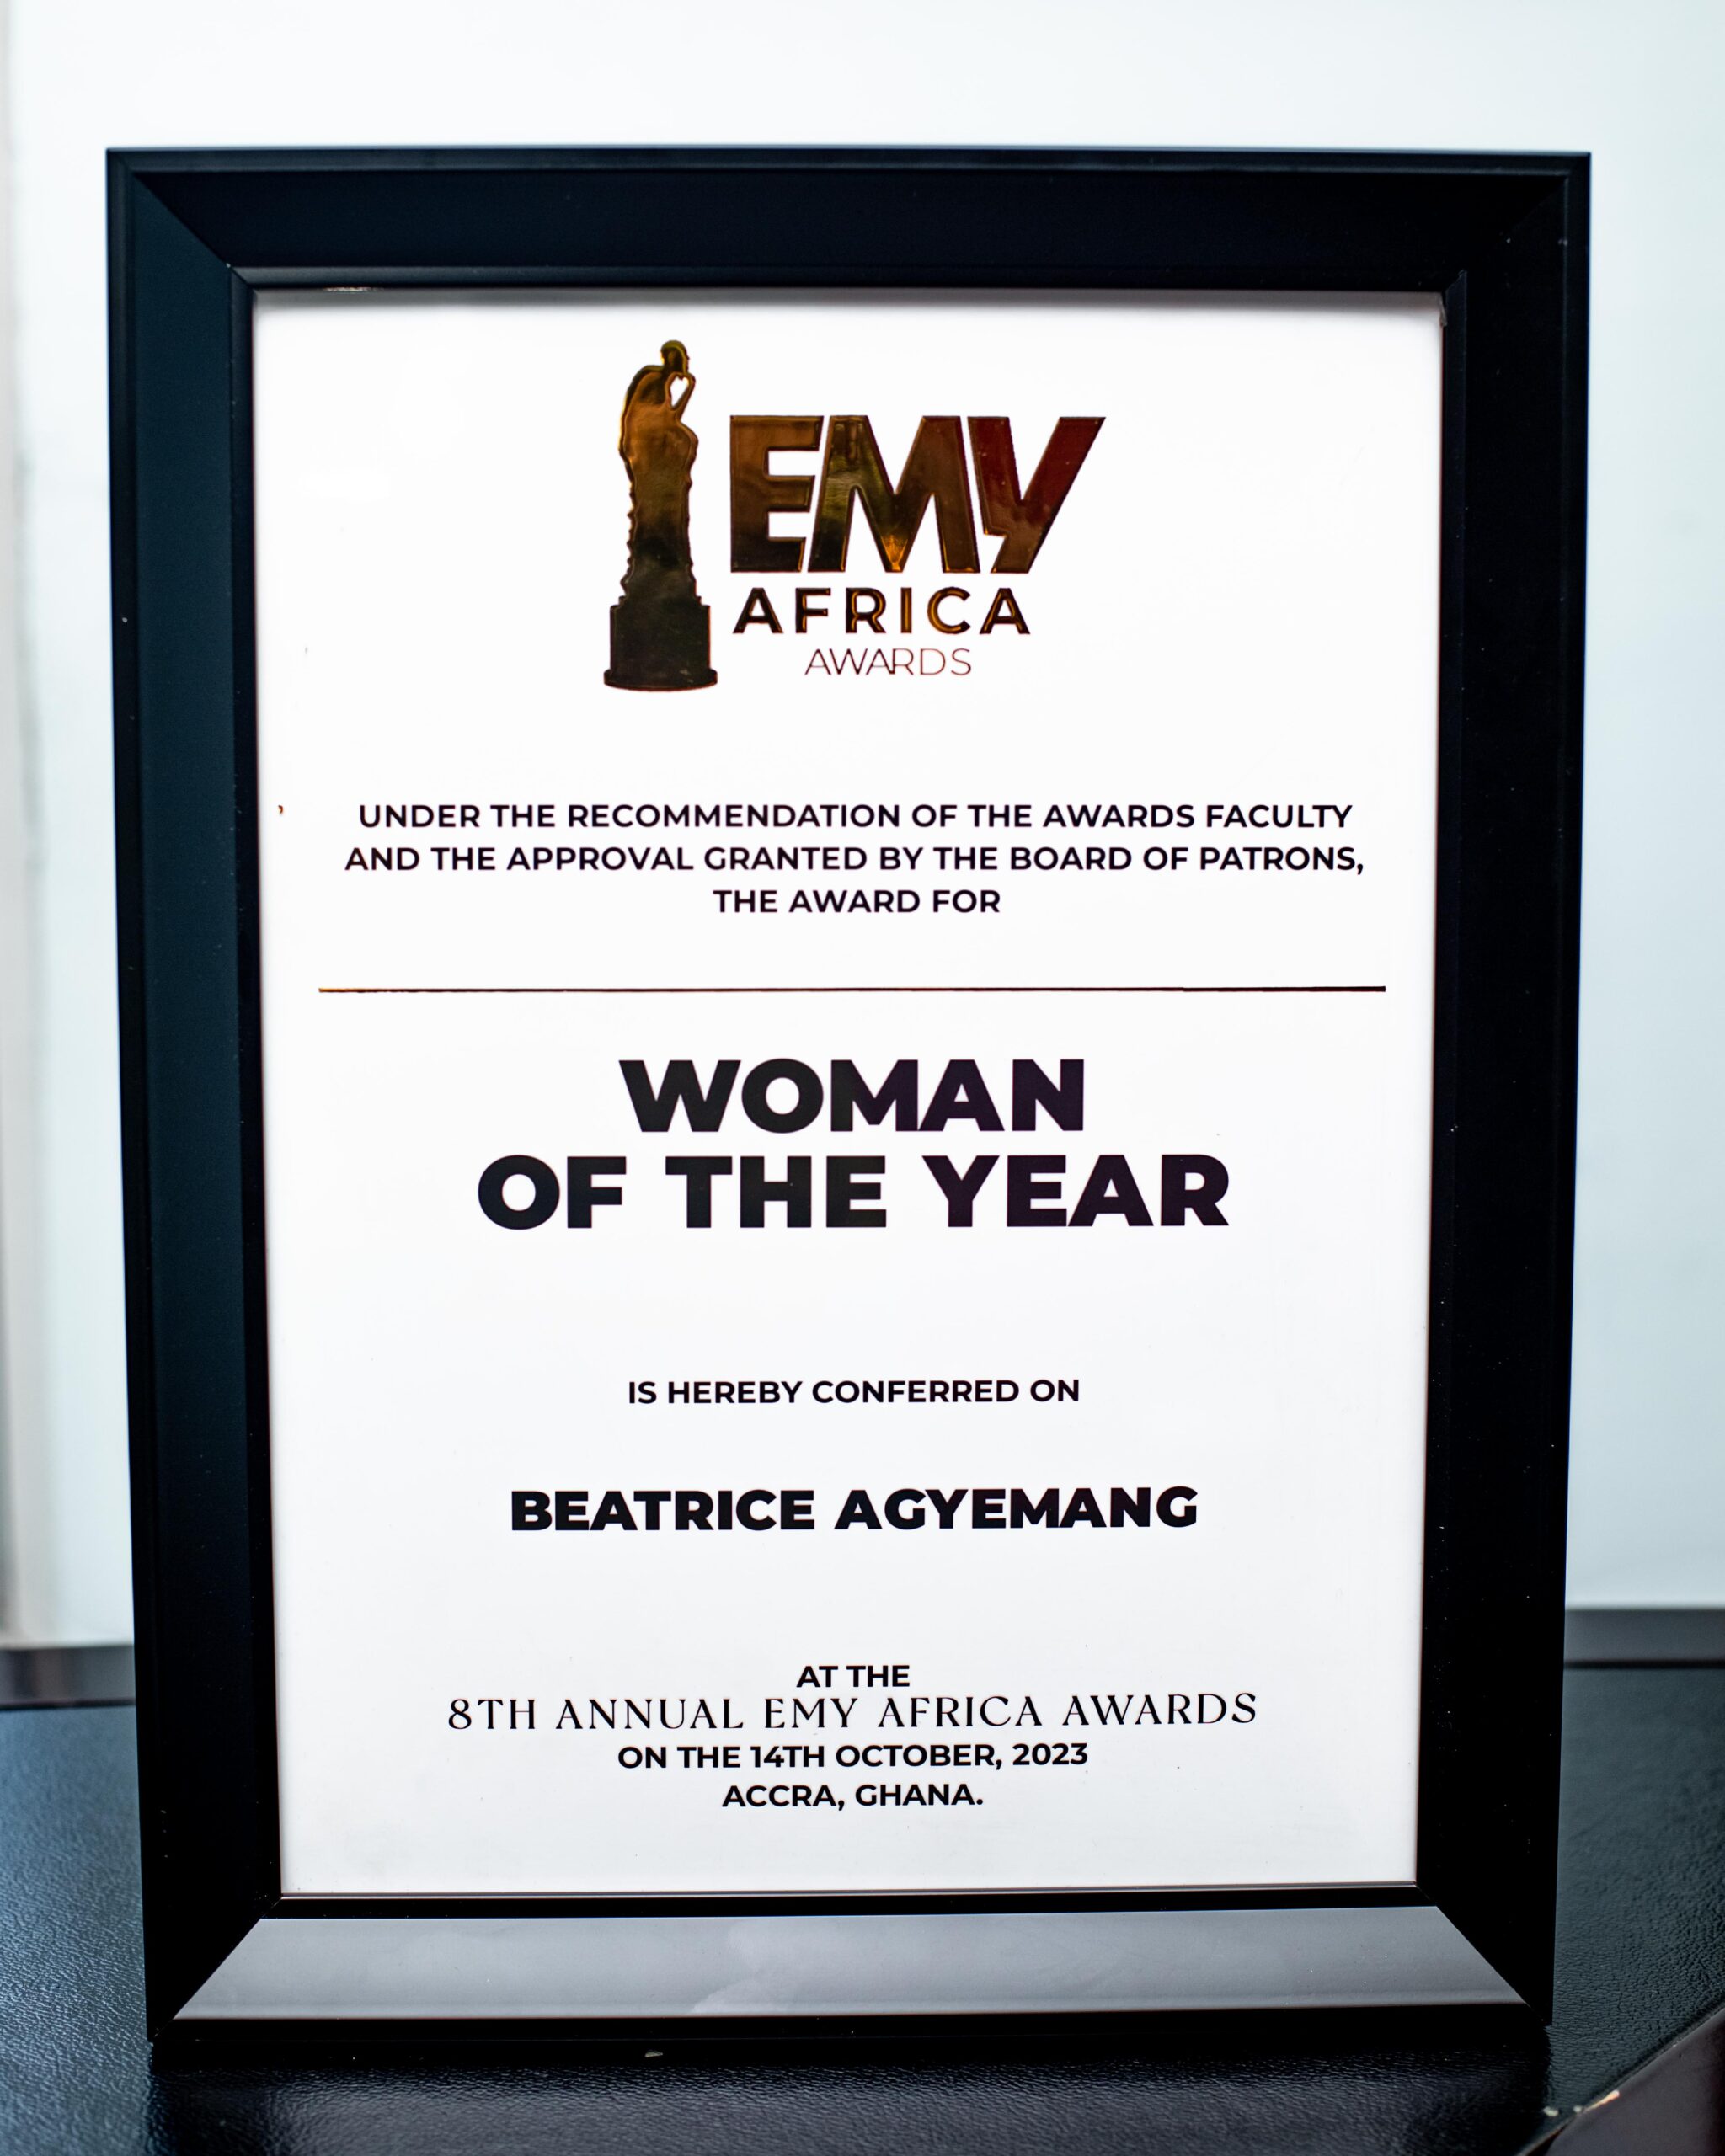 Group CEO Of Media General Wins Woman Of The Year At EMY Africa Awards 2023